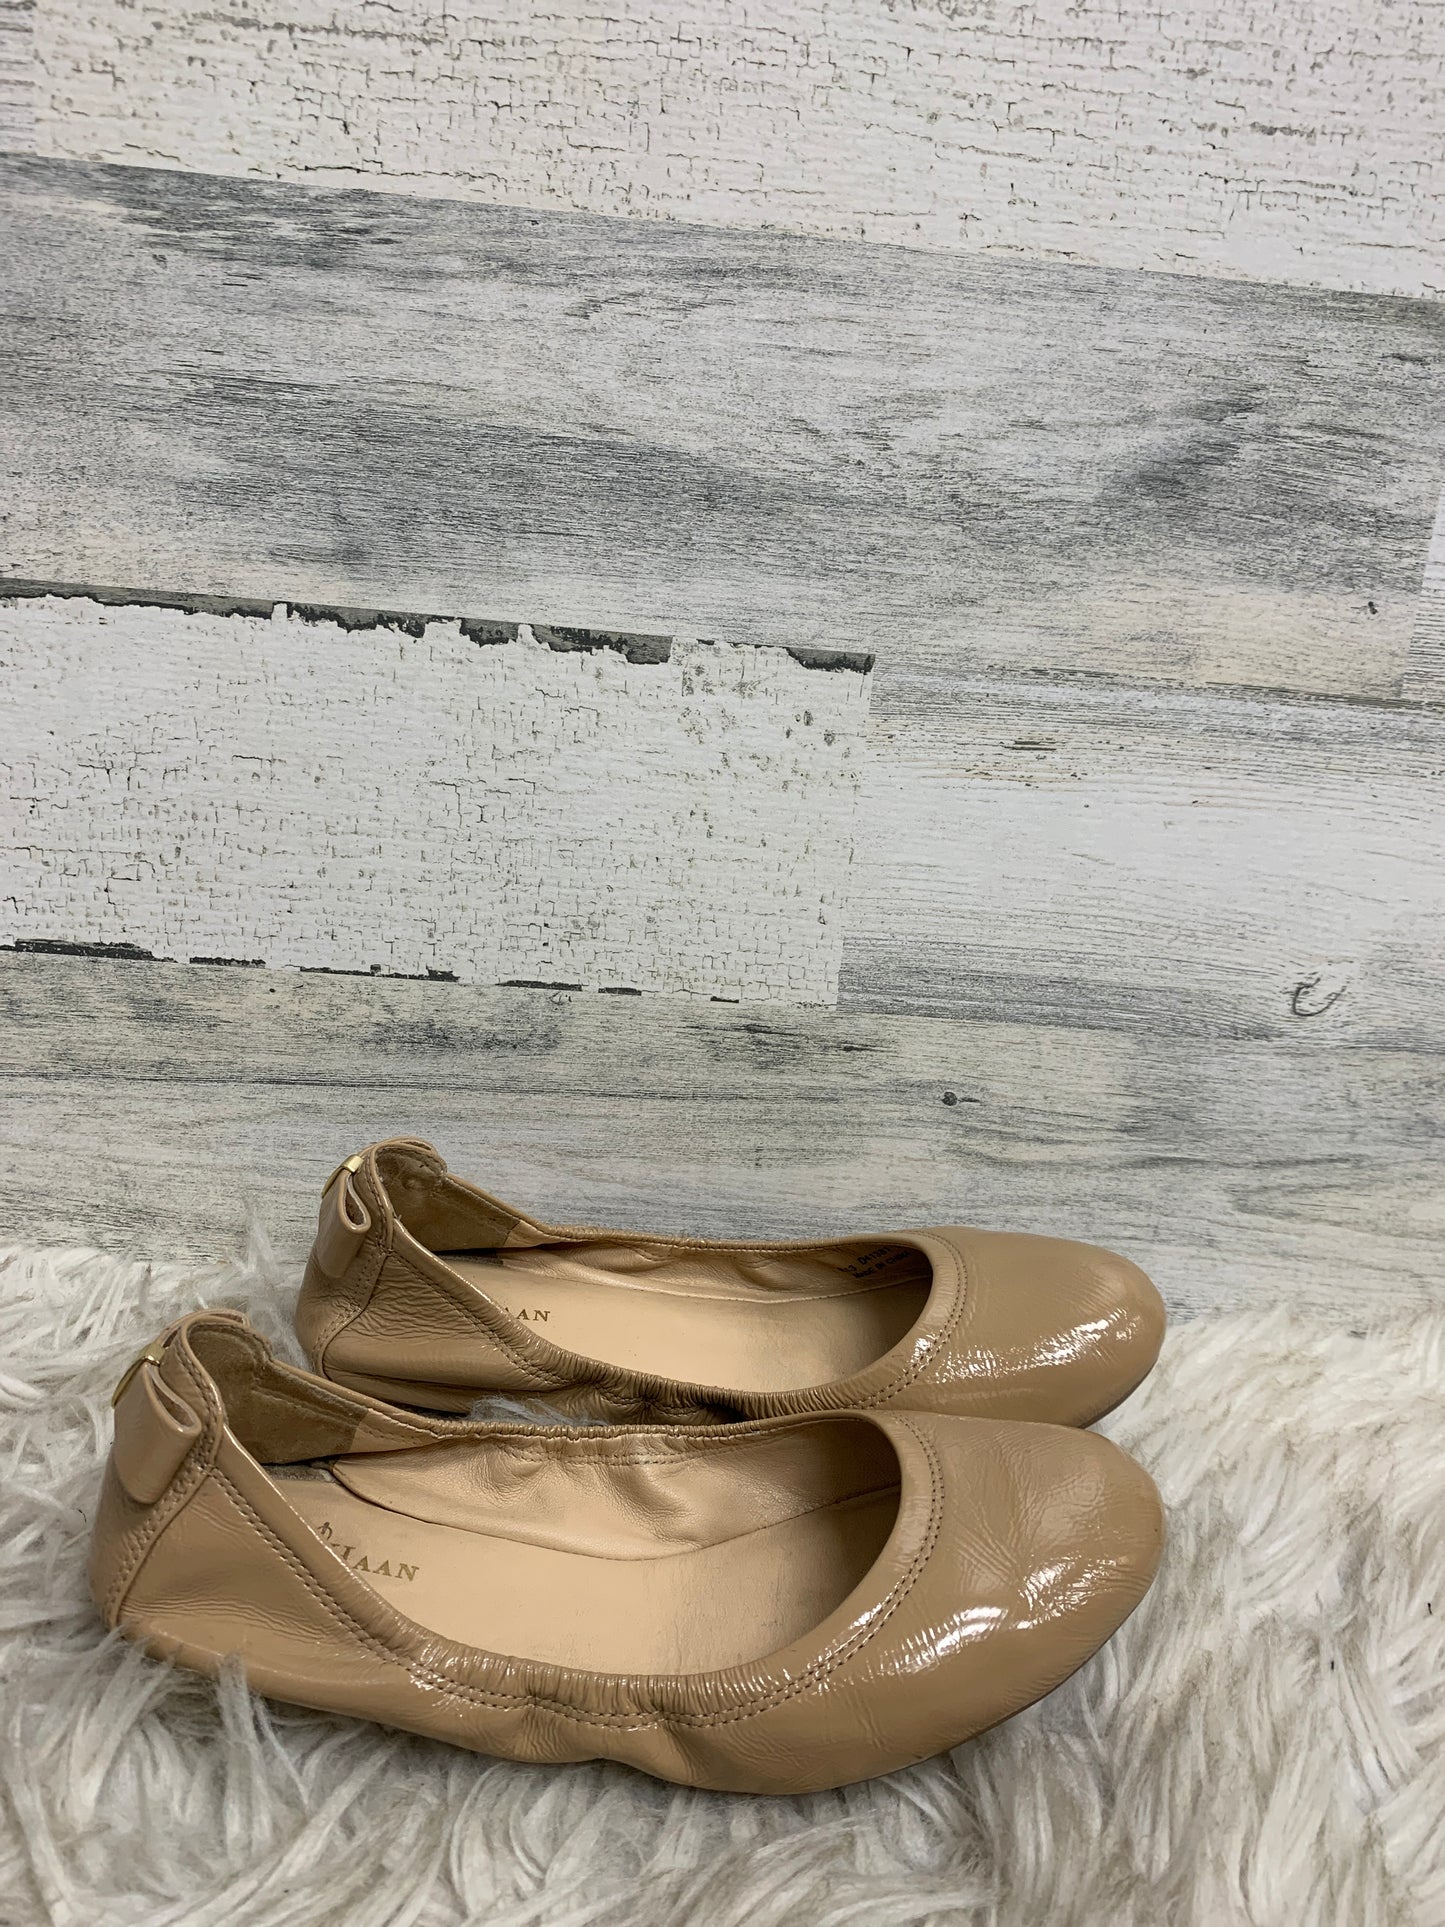 Sandals Flats By Unity  Size: 8